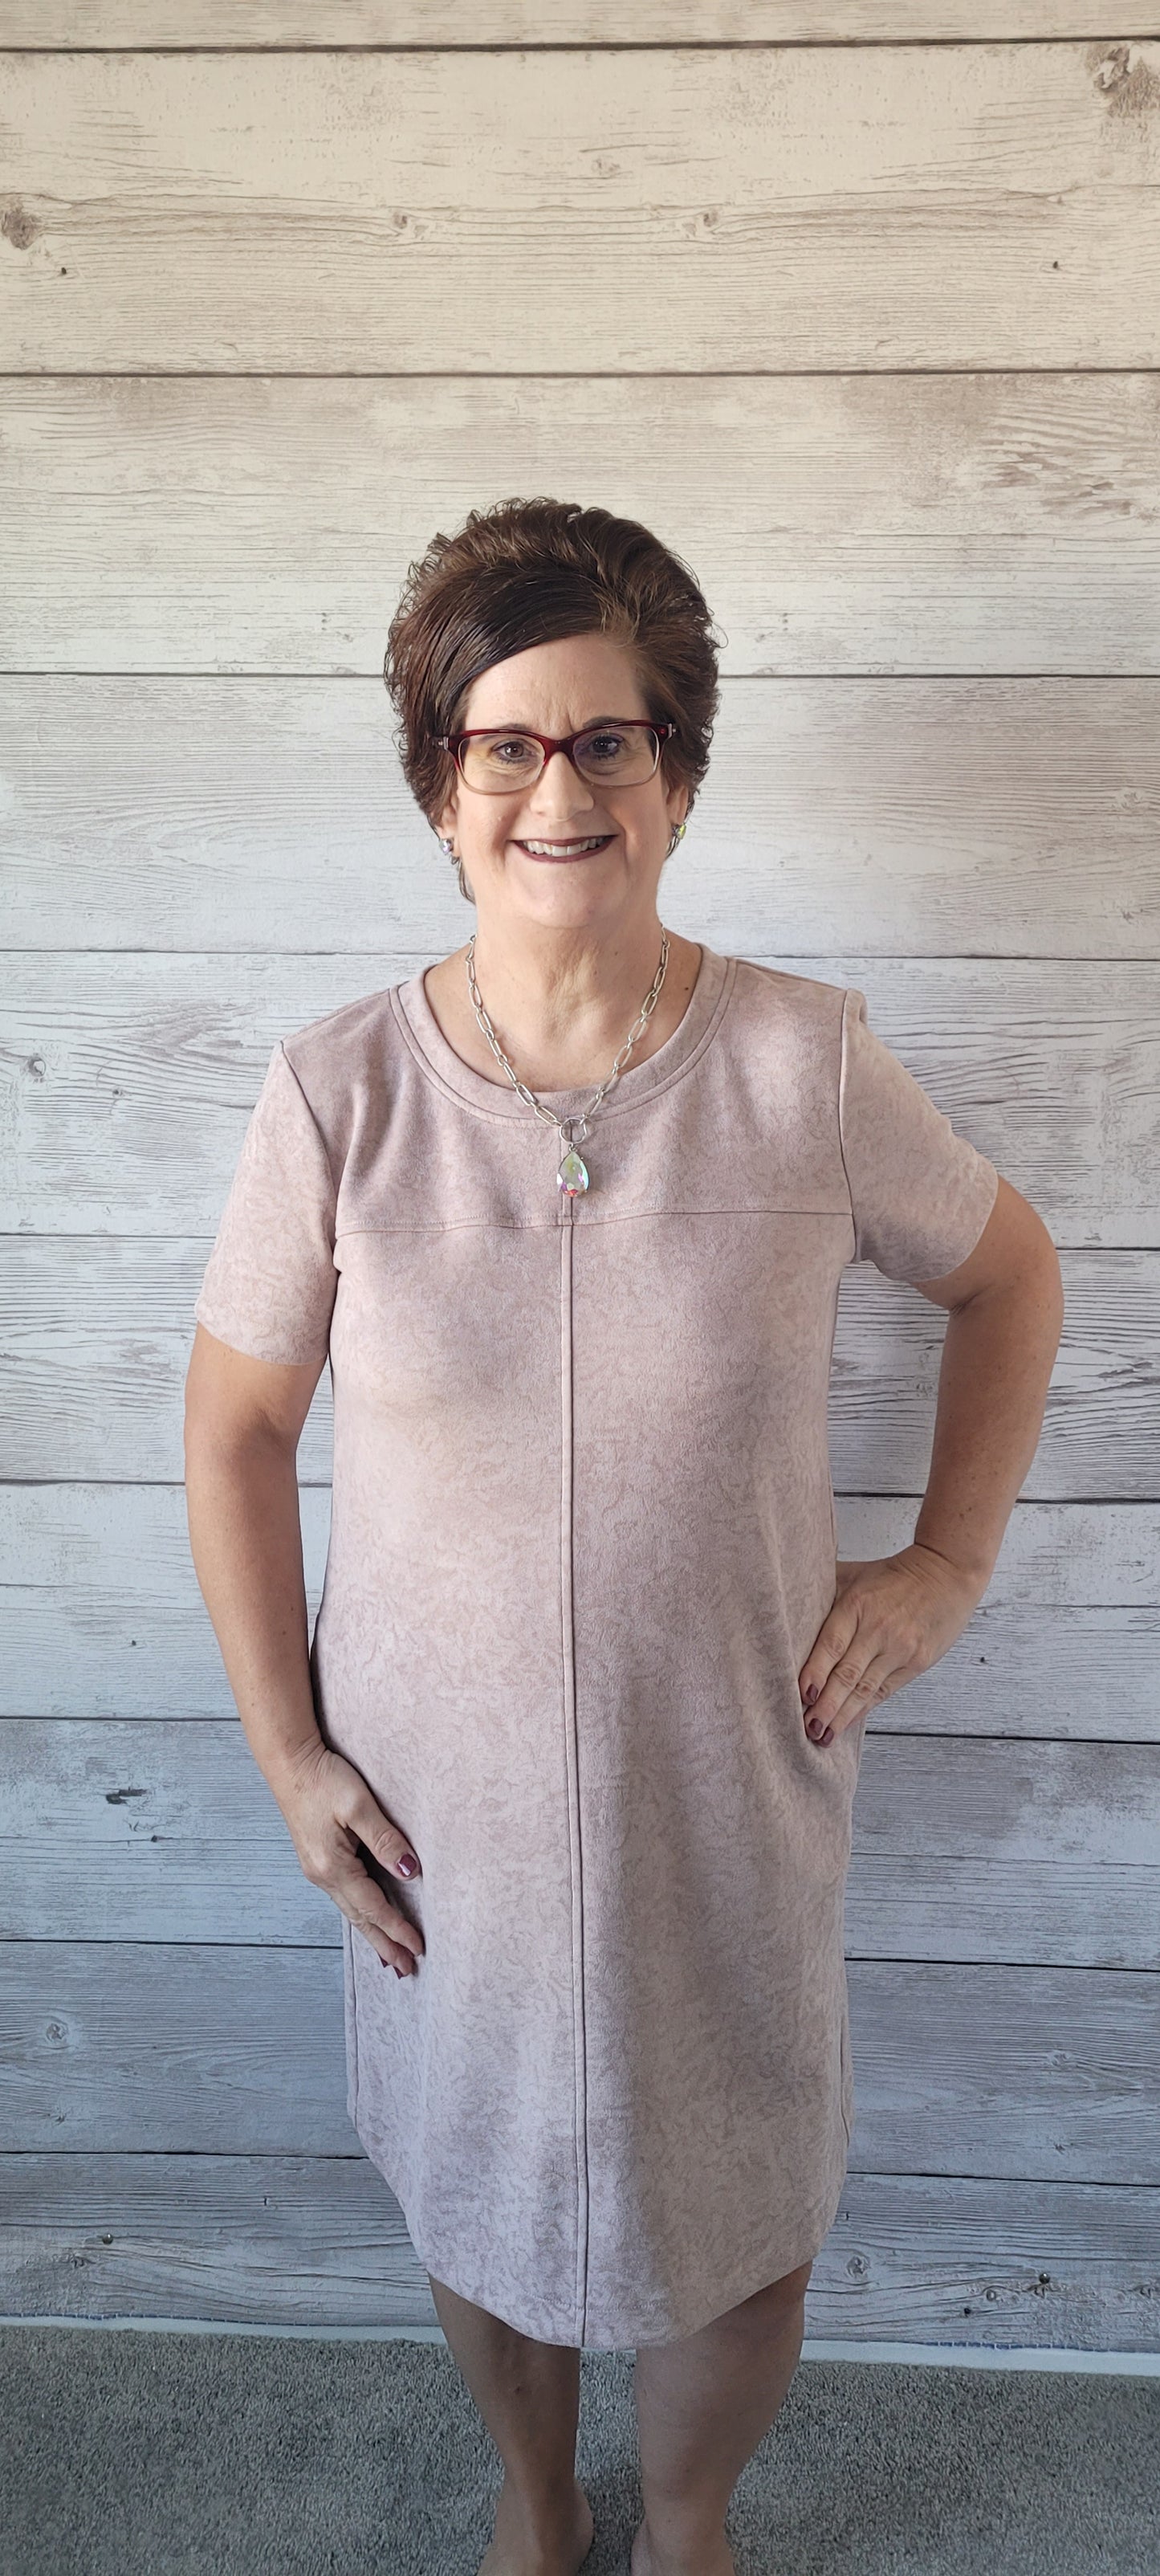 Dress to impress in this "Winona Mauve Printed Suede Shift Dress" and show off your country flair! With its round neckline, short sleeves, side pockets, and zipper back closure, it’s sure to be your go-to look for any special occasion. Yee-haw! Sizes small through large.